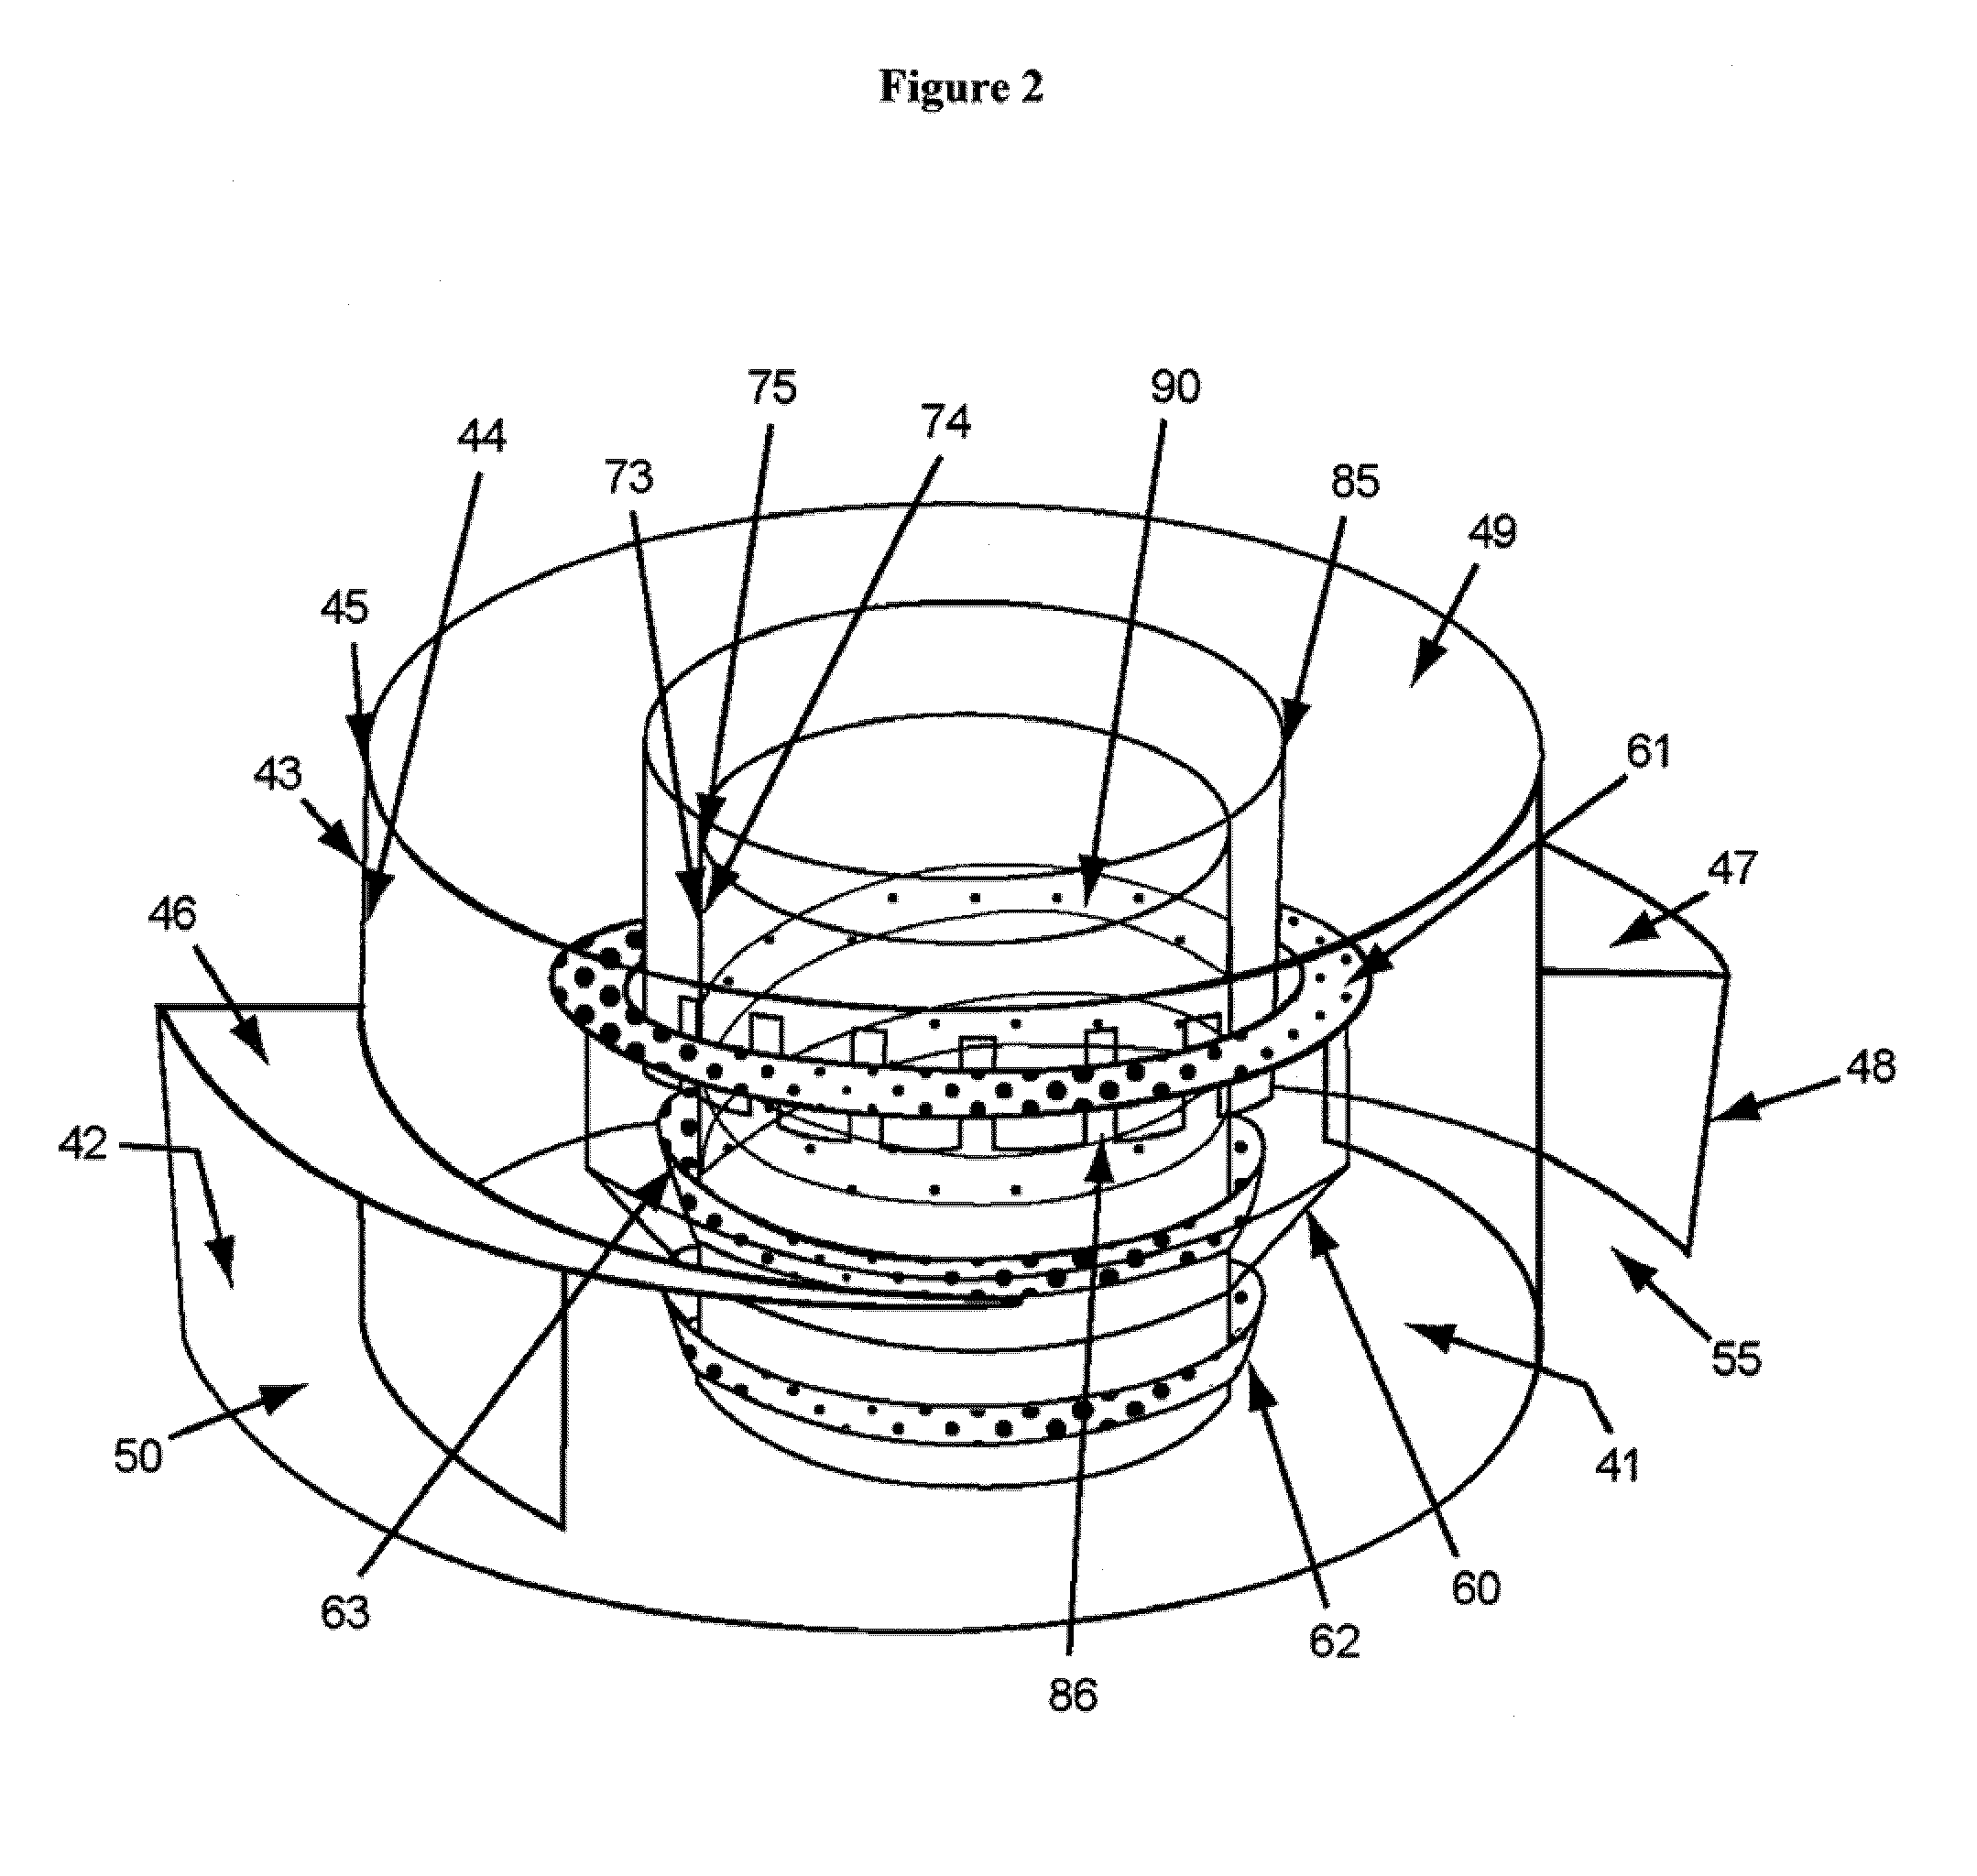 Mixing device for a down-flow reactor